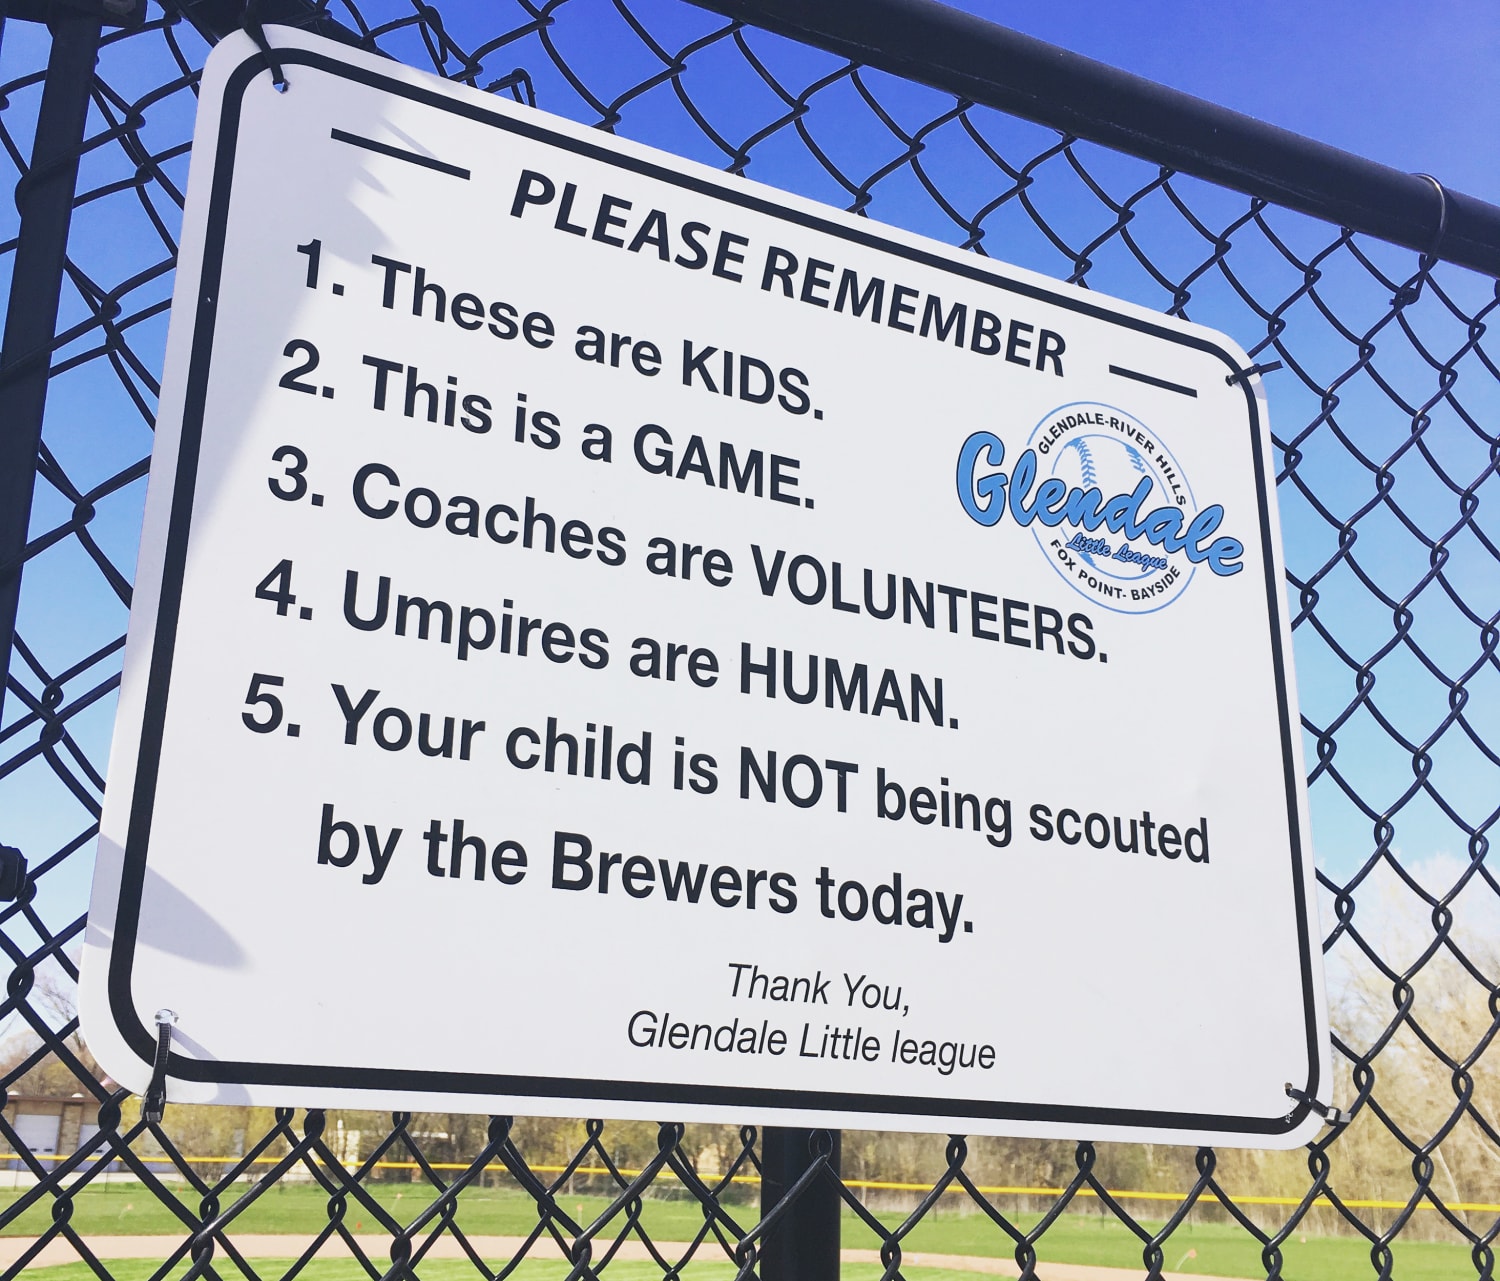 Youth Baseball Coach Works To Keep Overbearing Parents In Check